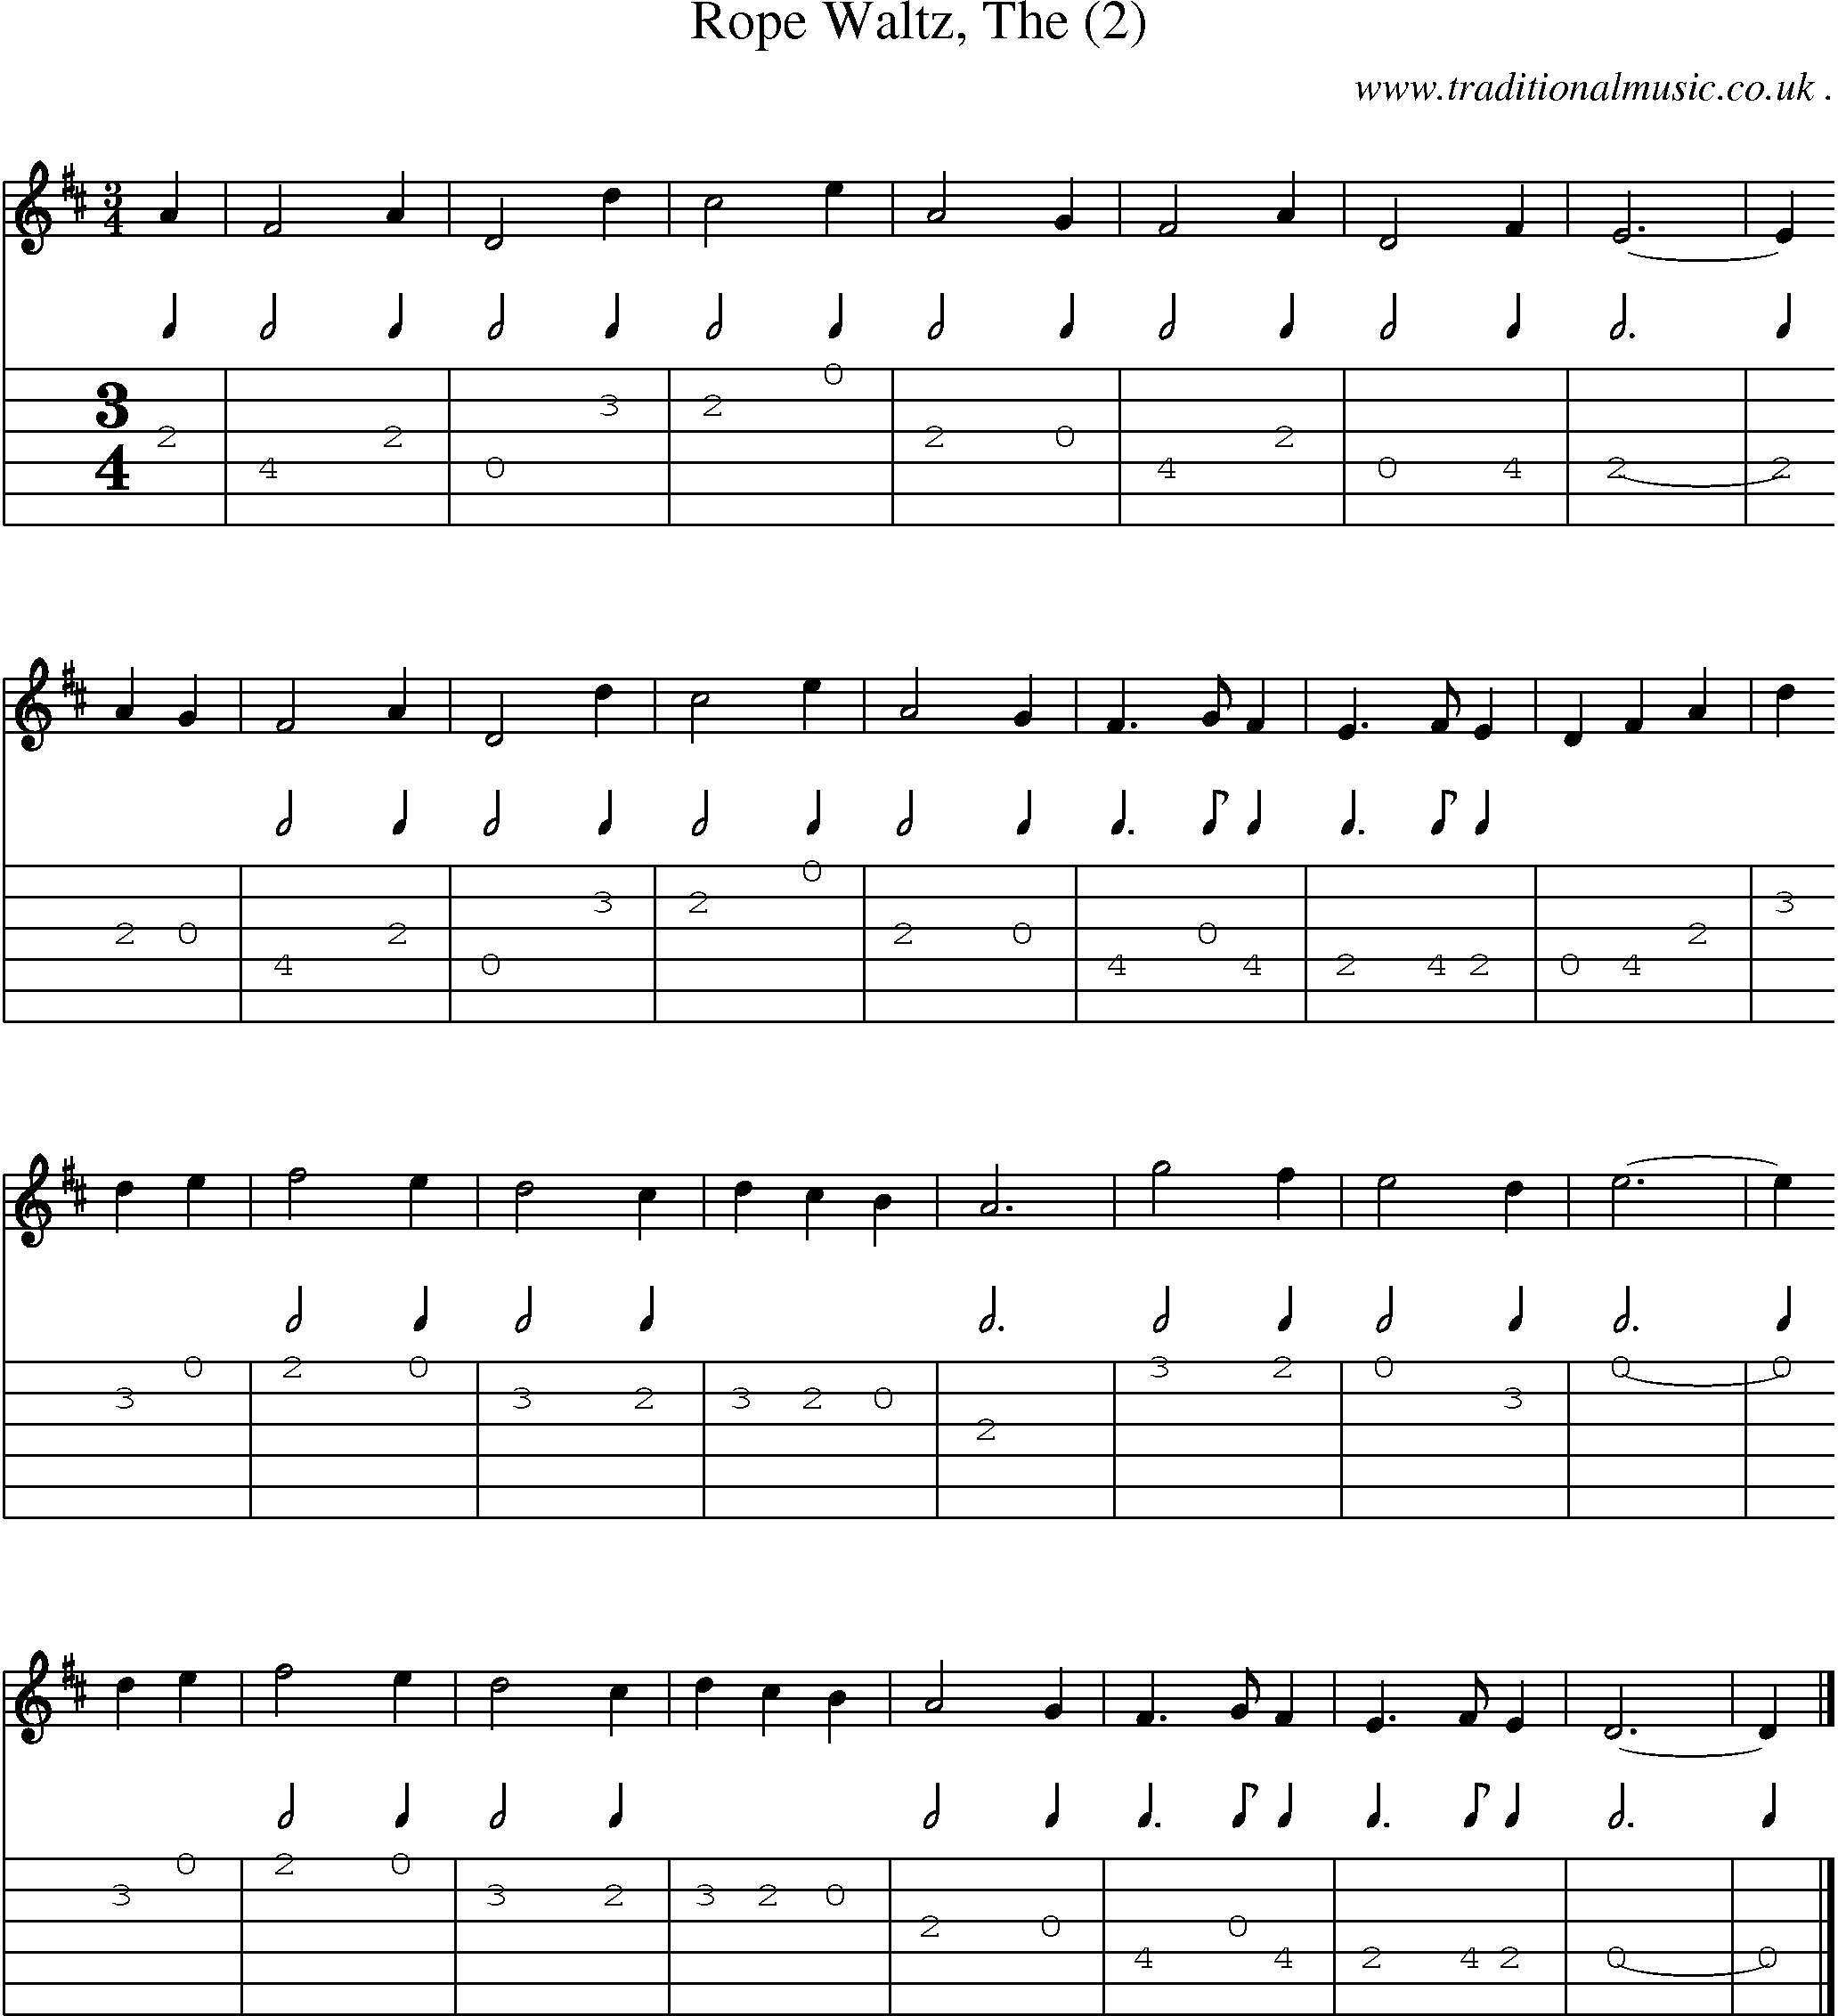 Sheet-music  score, Chords and Guitar Tabs for Rope Waltz The 2